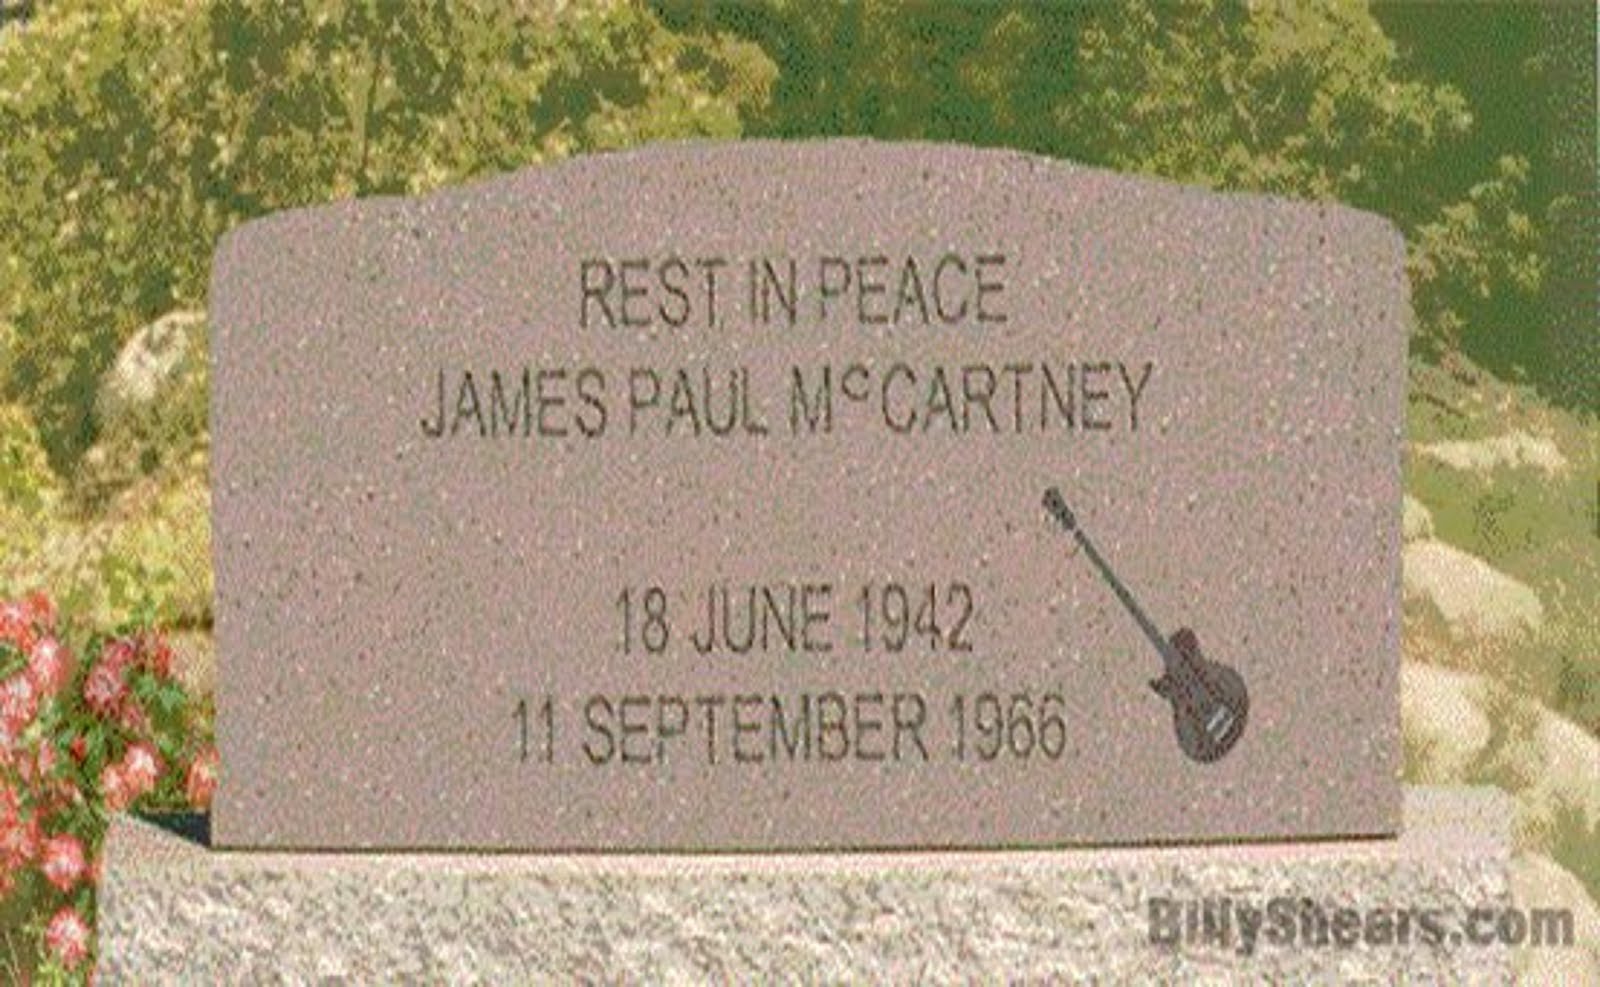 BEATLE PAUL McCARTNEY'S GRAVE STONE - DEDICATED BY BILLY SHEARS PAUL'S FIRST STAND-IN